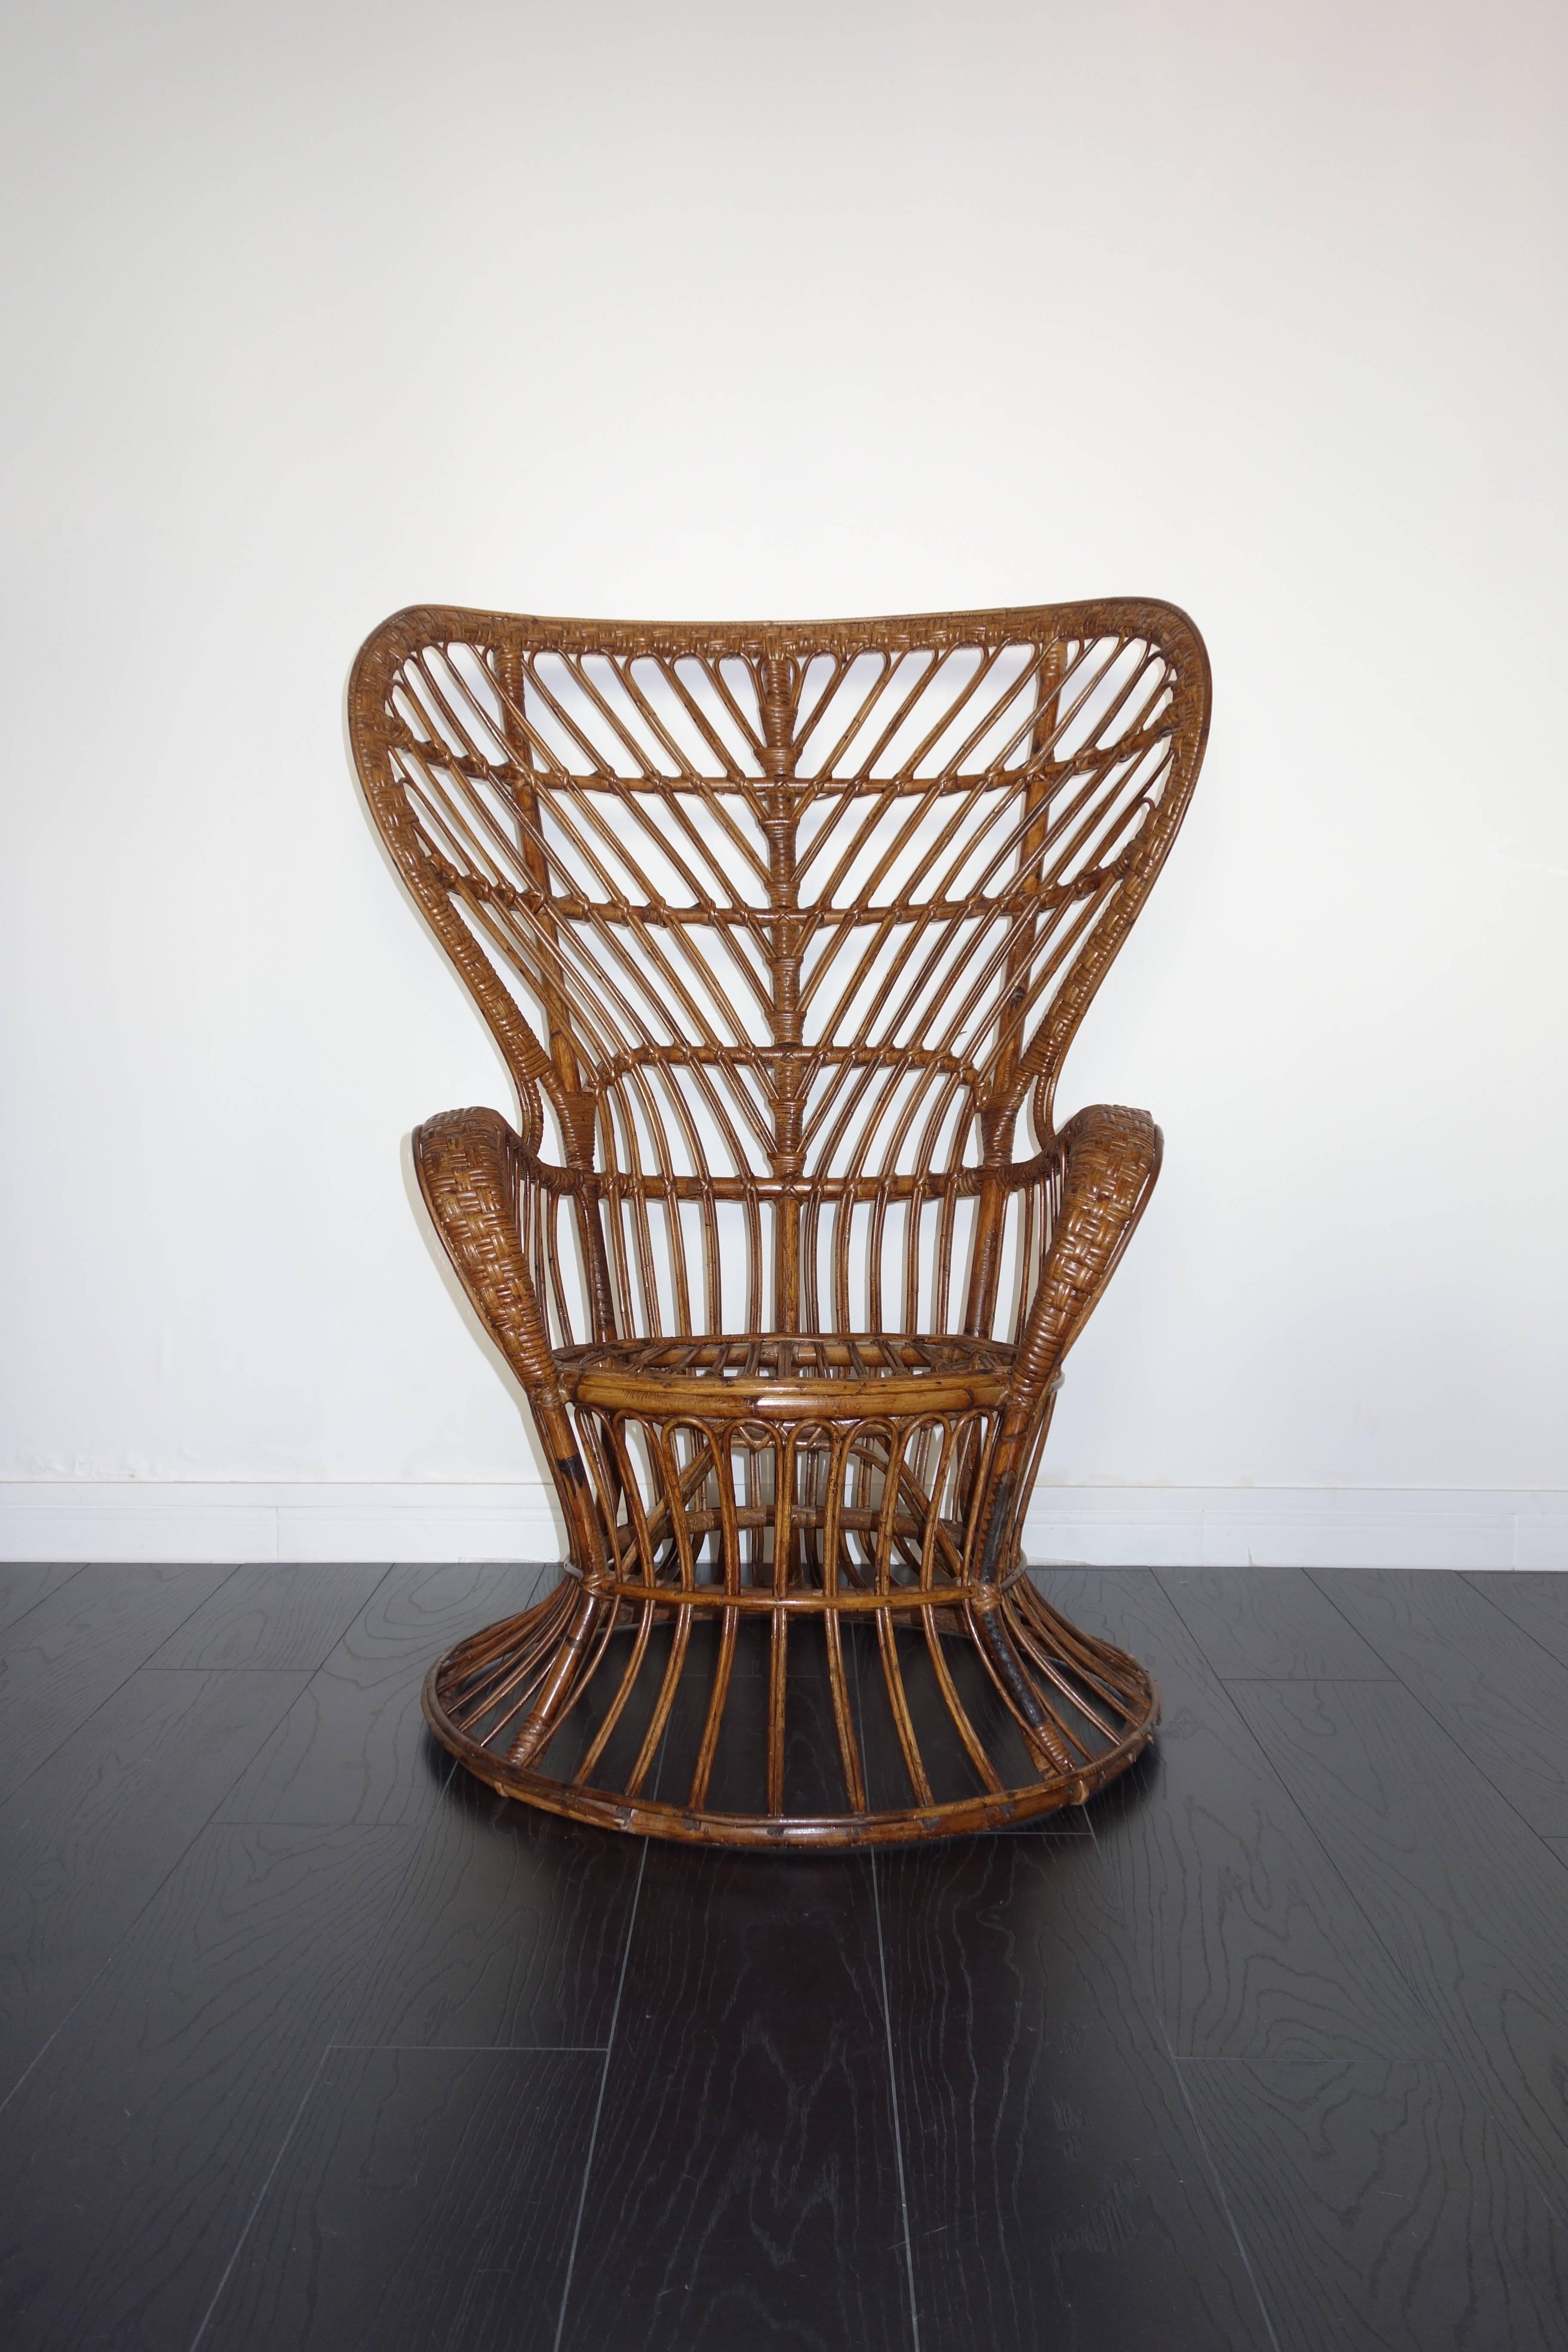 Rattan armchair by Lio Carminati for Bonacina. Italian handmade manufacture of the 1950s. Model created for the ship Conte Biancamaro. In its original state. In very good condition: beautiful patina, varnished original well preserved, comfortable